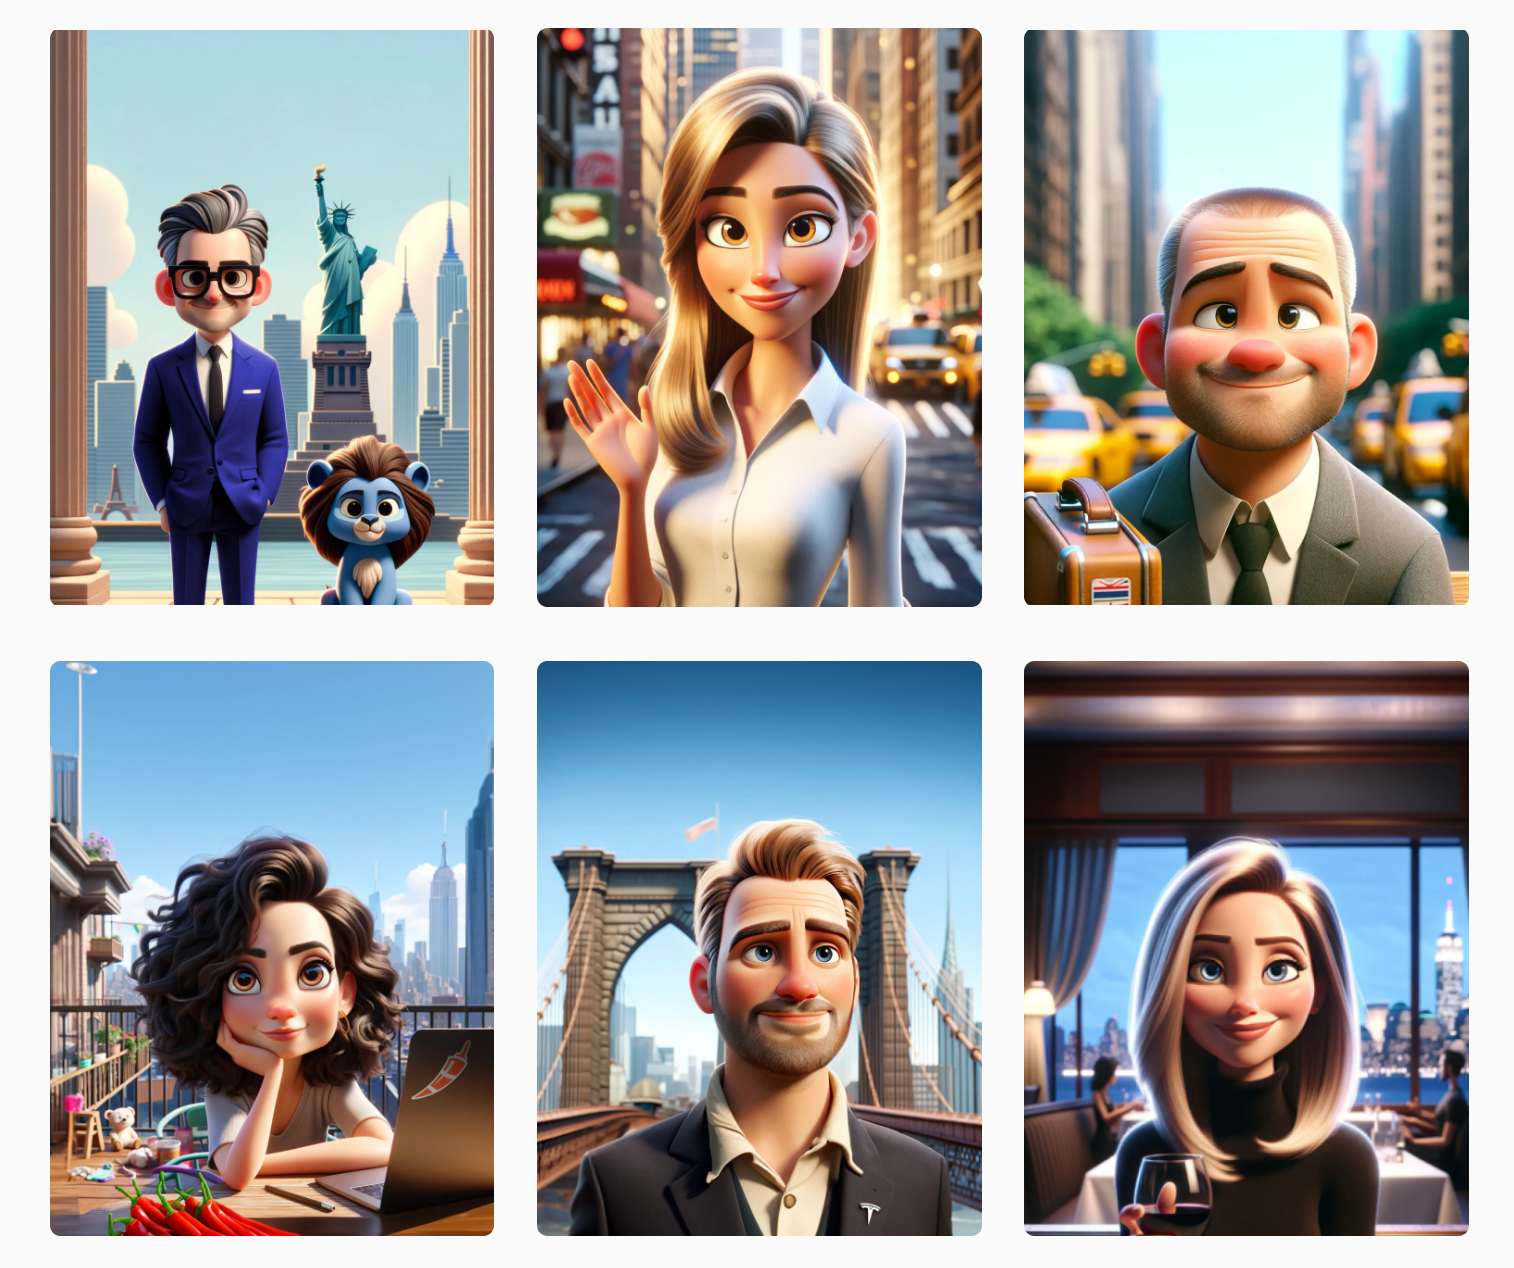 pixar ai enhanced characters by Superside